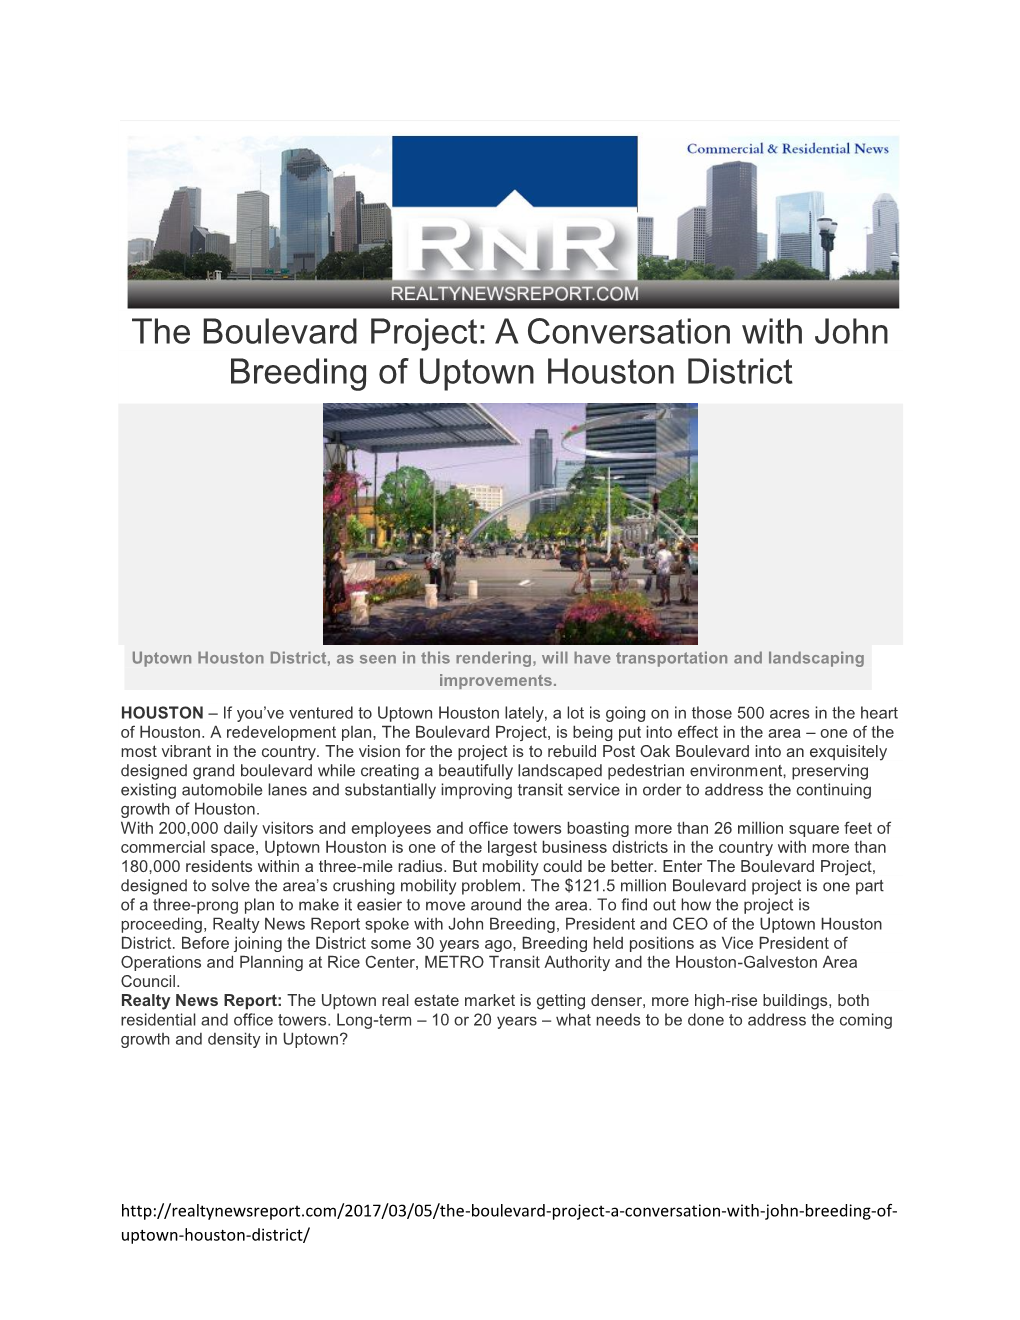 A Conversation with John Breeding of Uptown Houston District